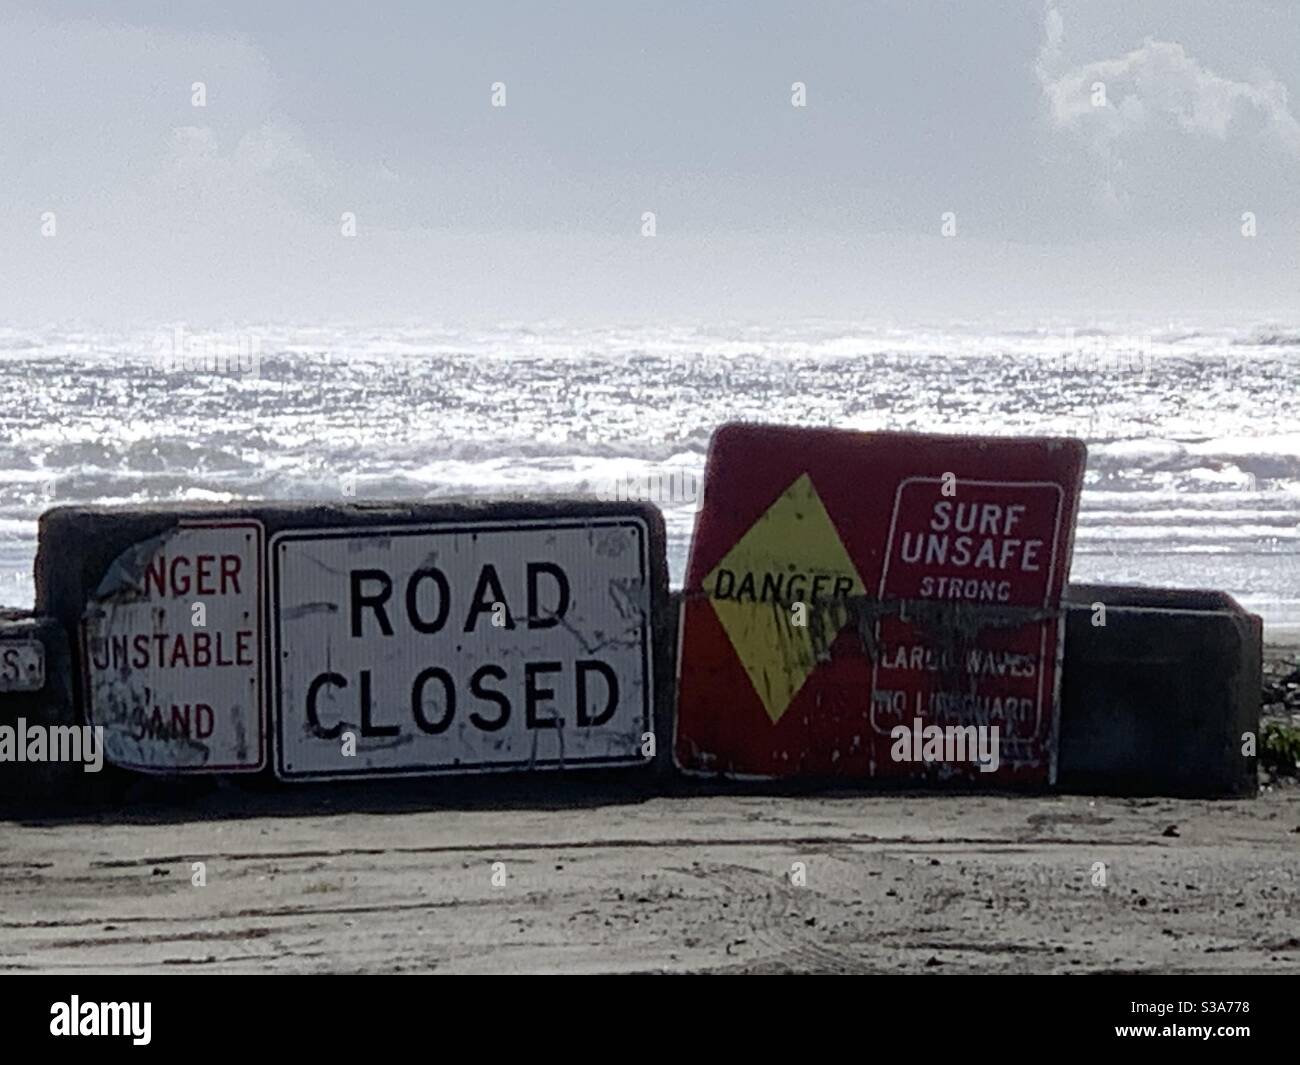 Road closed where the road has washed away into the Pacific Ocean at North Cove’s Wash Away Beach between Grayland &Tokeland WA. Lost are homes, a lighthouse, a schoolhouse & more. Stock Photo